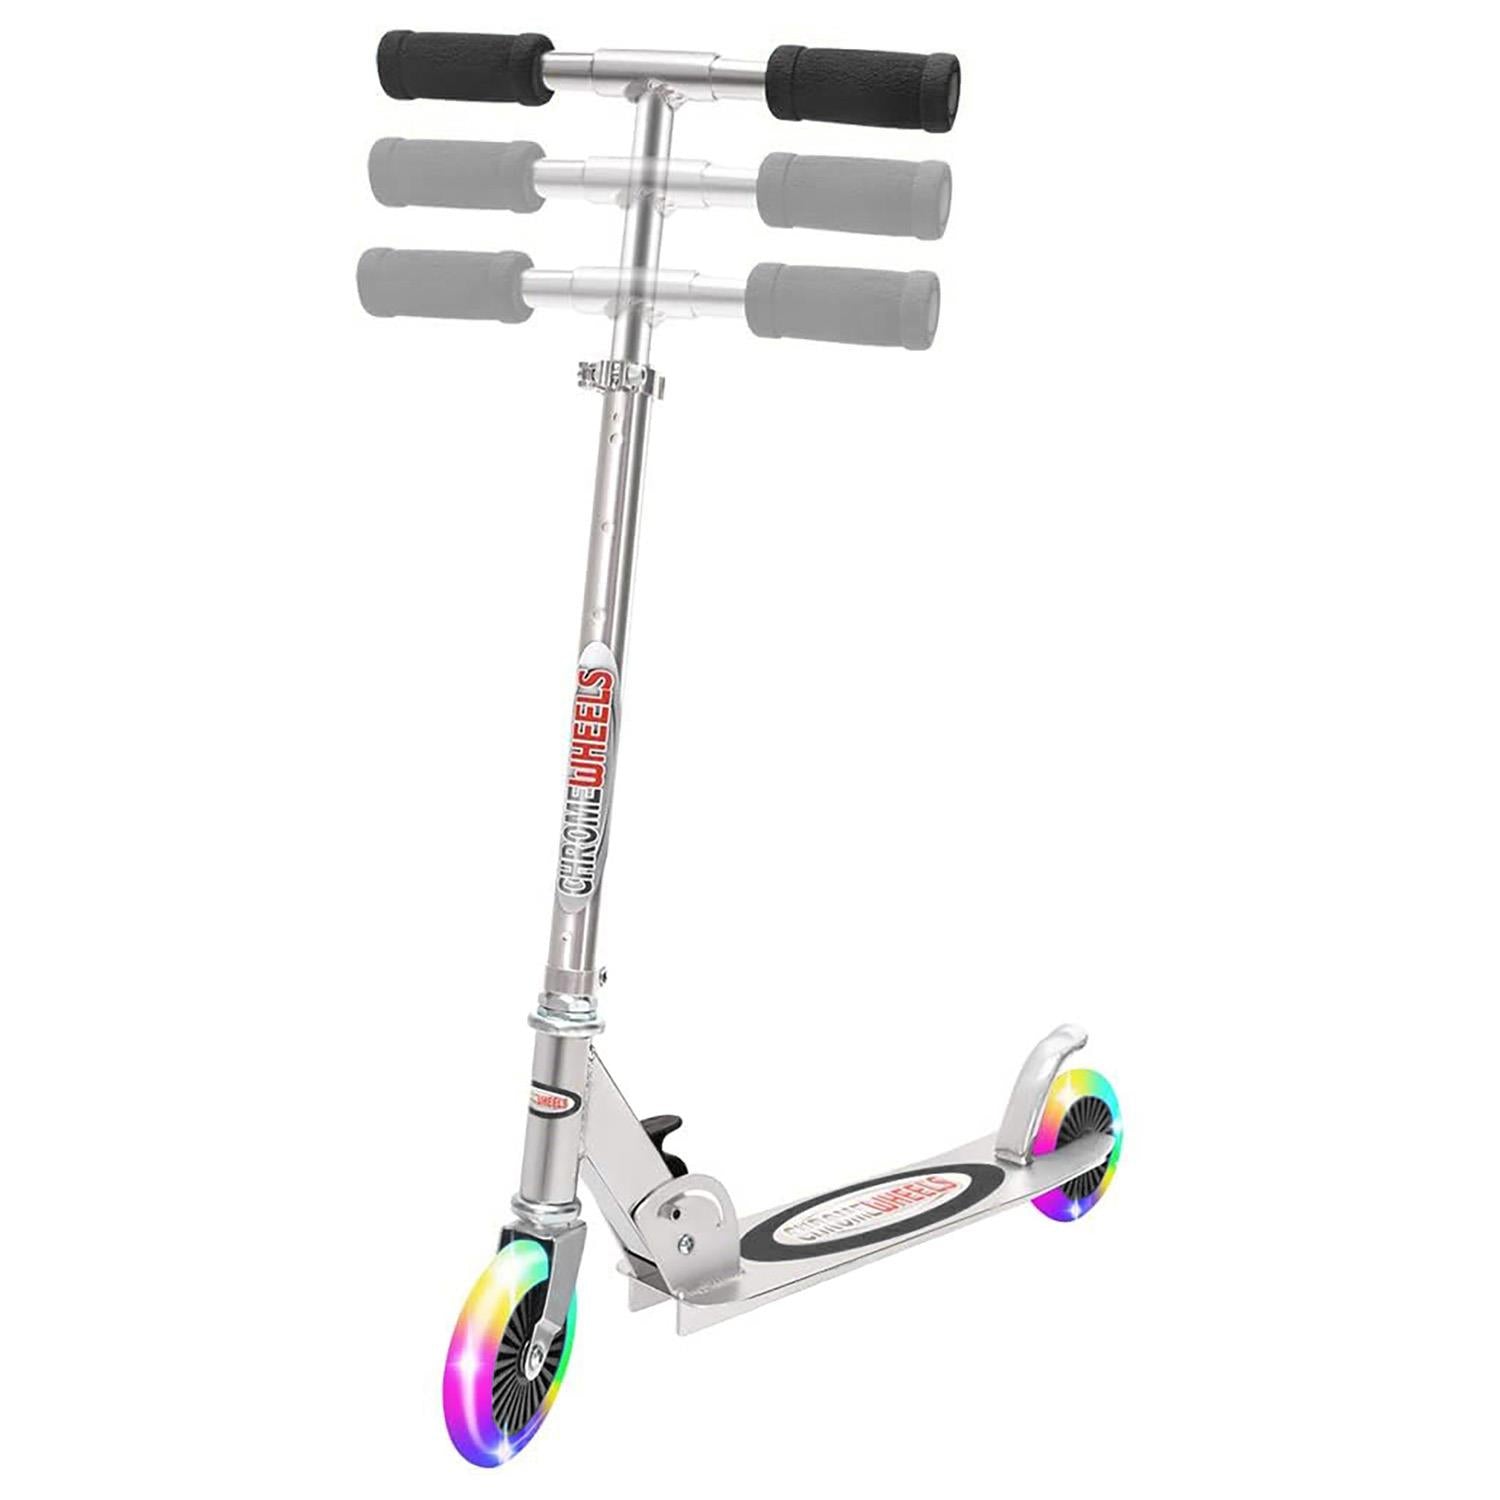 Foldable Kids Scooter Black by The Magic Toy Shop - The Magic Toy Shop